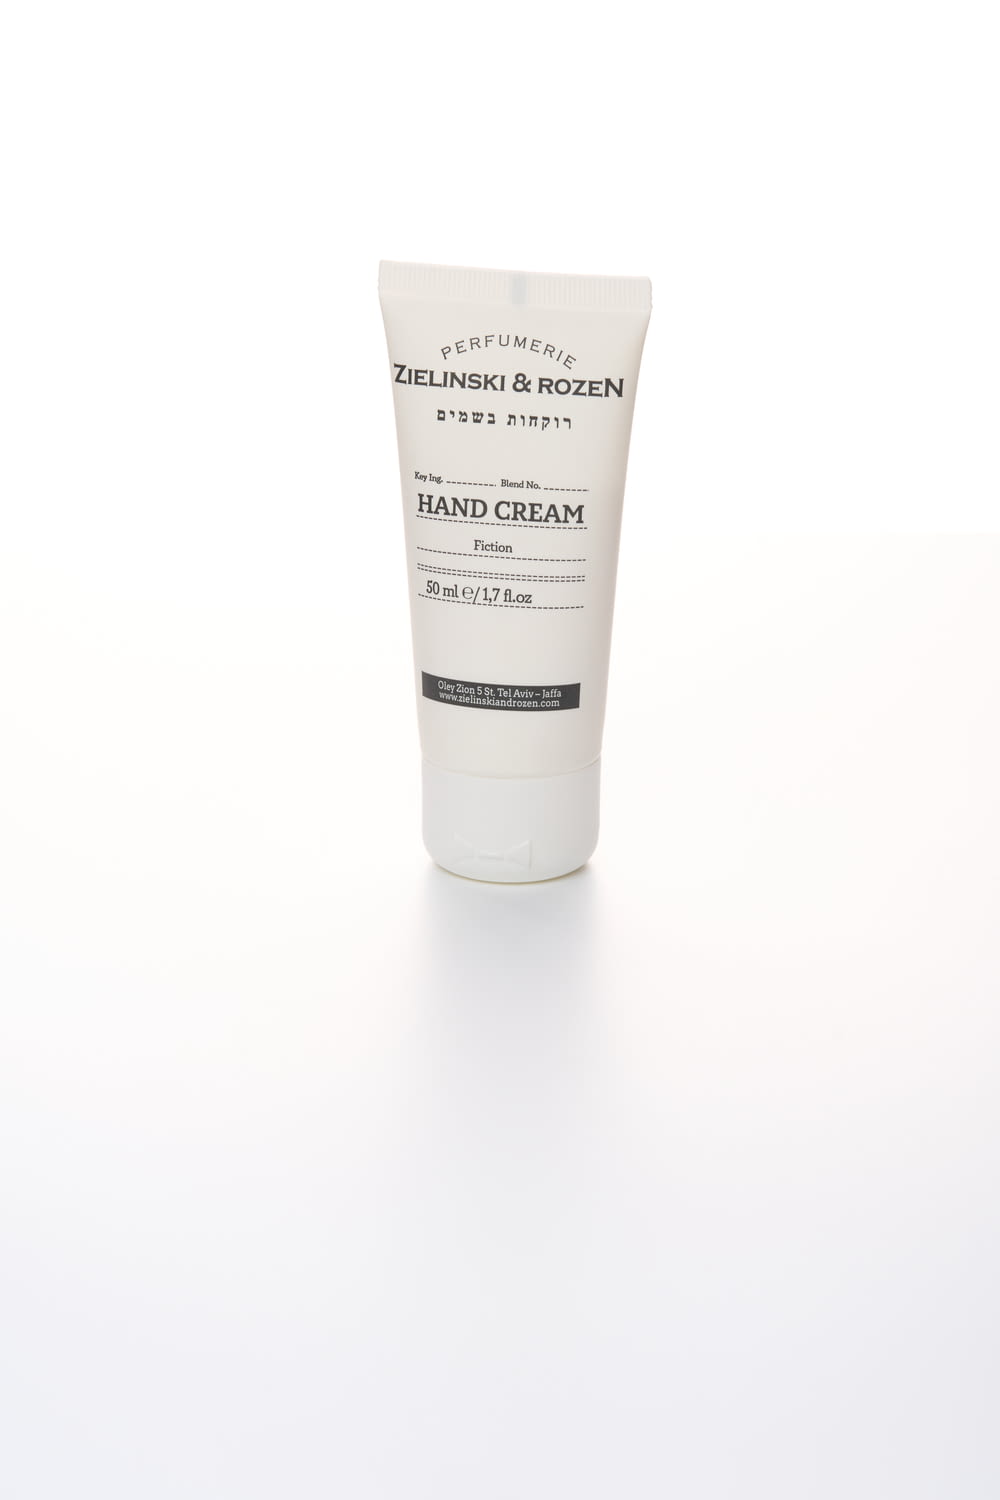 a tube of hand cream on a white surface